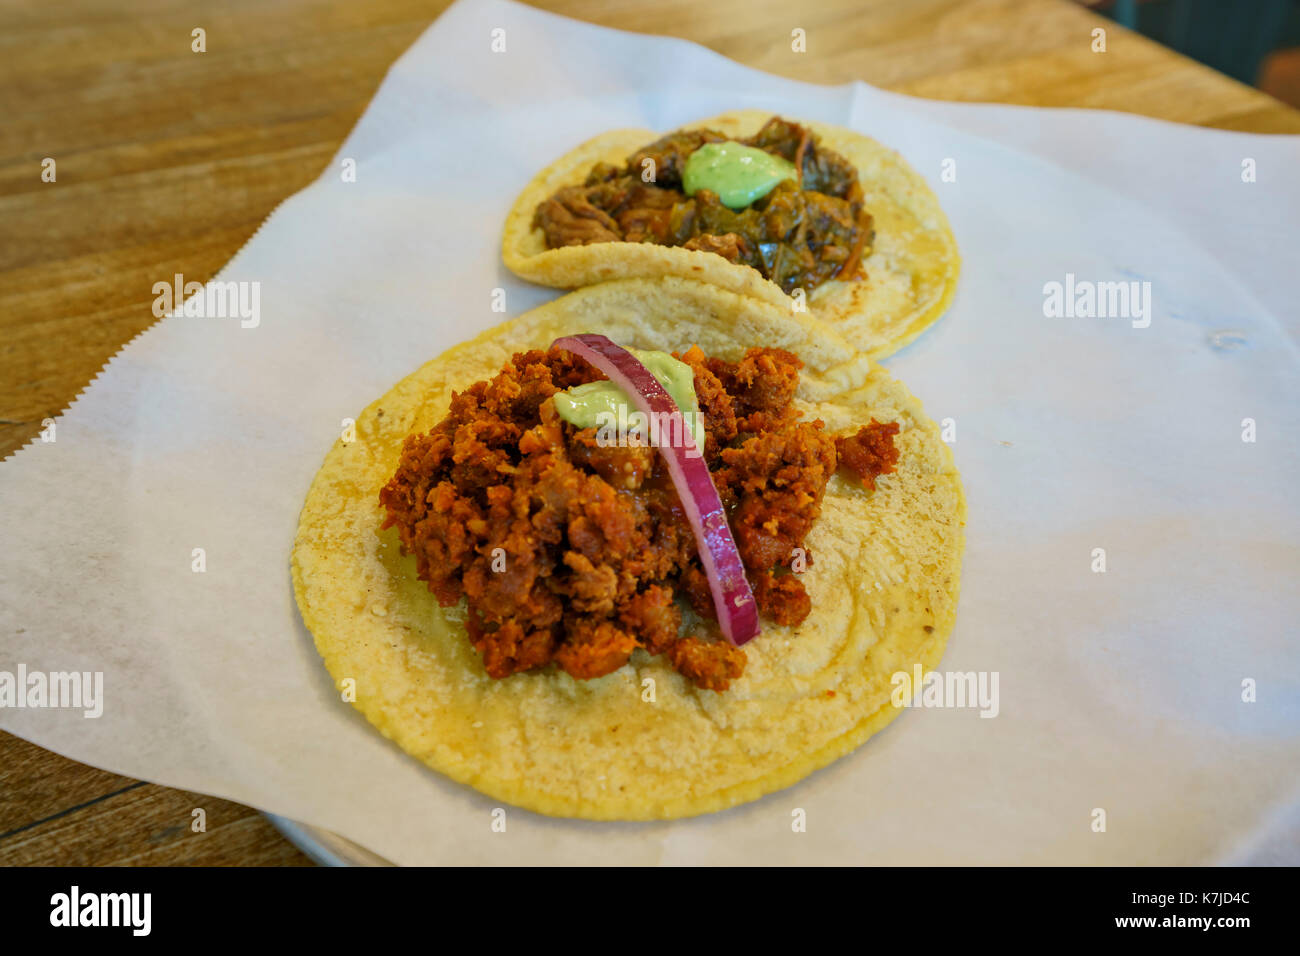 Delicious Mexican style beef and pork taco, ate at Los Angeles, California, U.S.A. Stock Photo